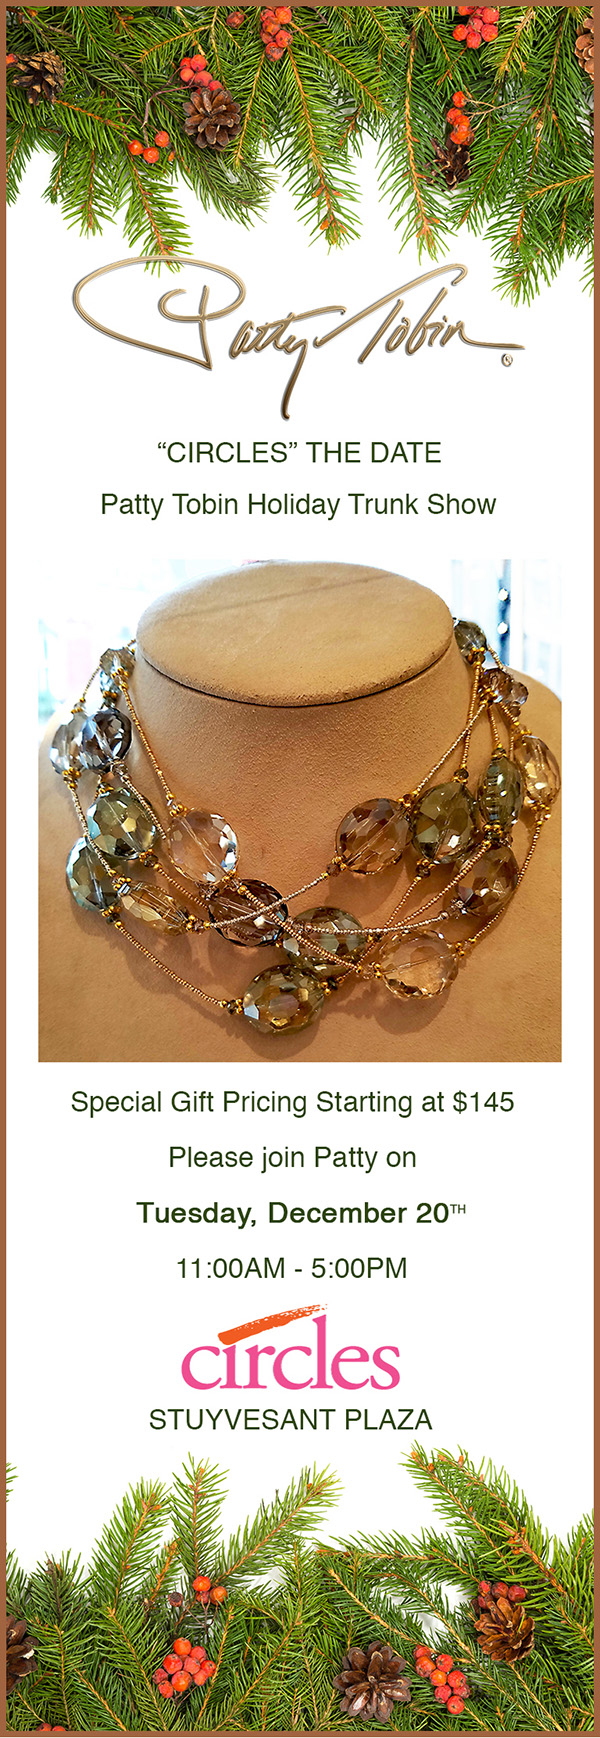 Patty Tobin Holiday Gifts Trunk Show at Circles on 12/20/16